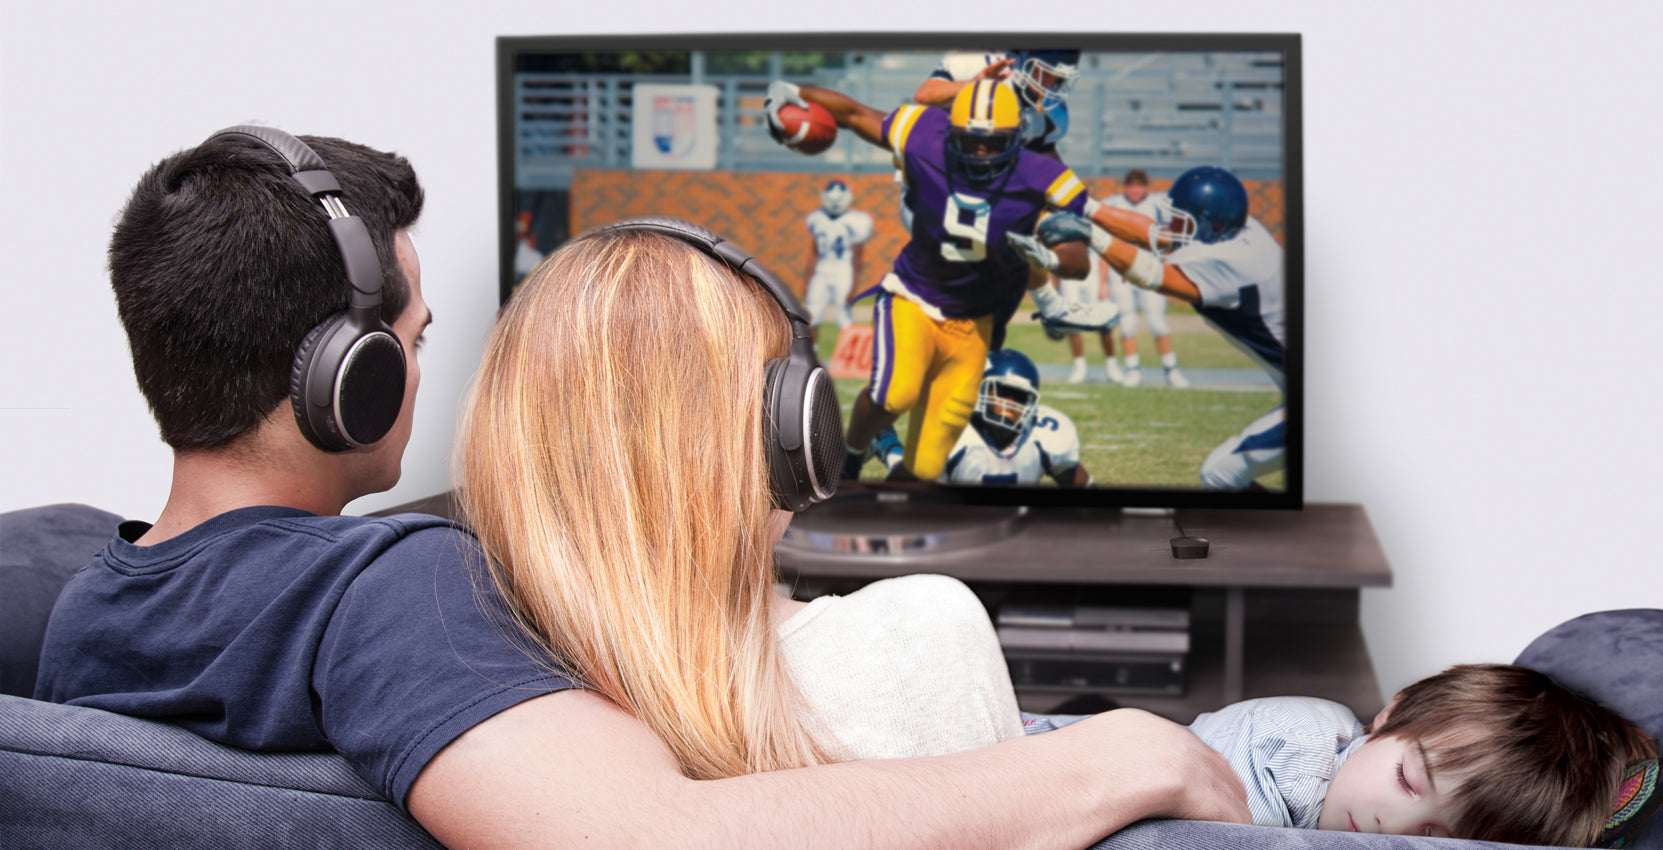 A couple wearing headphones watches a football game on tv while their child sleeps on the couch beside them.